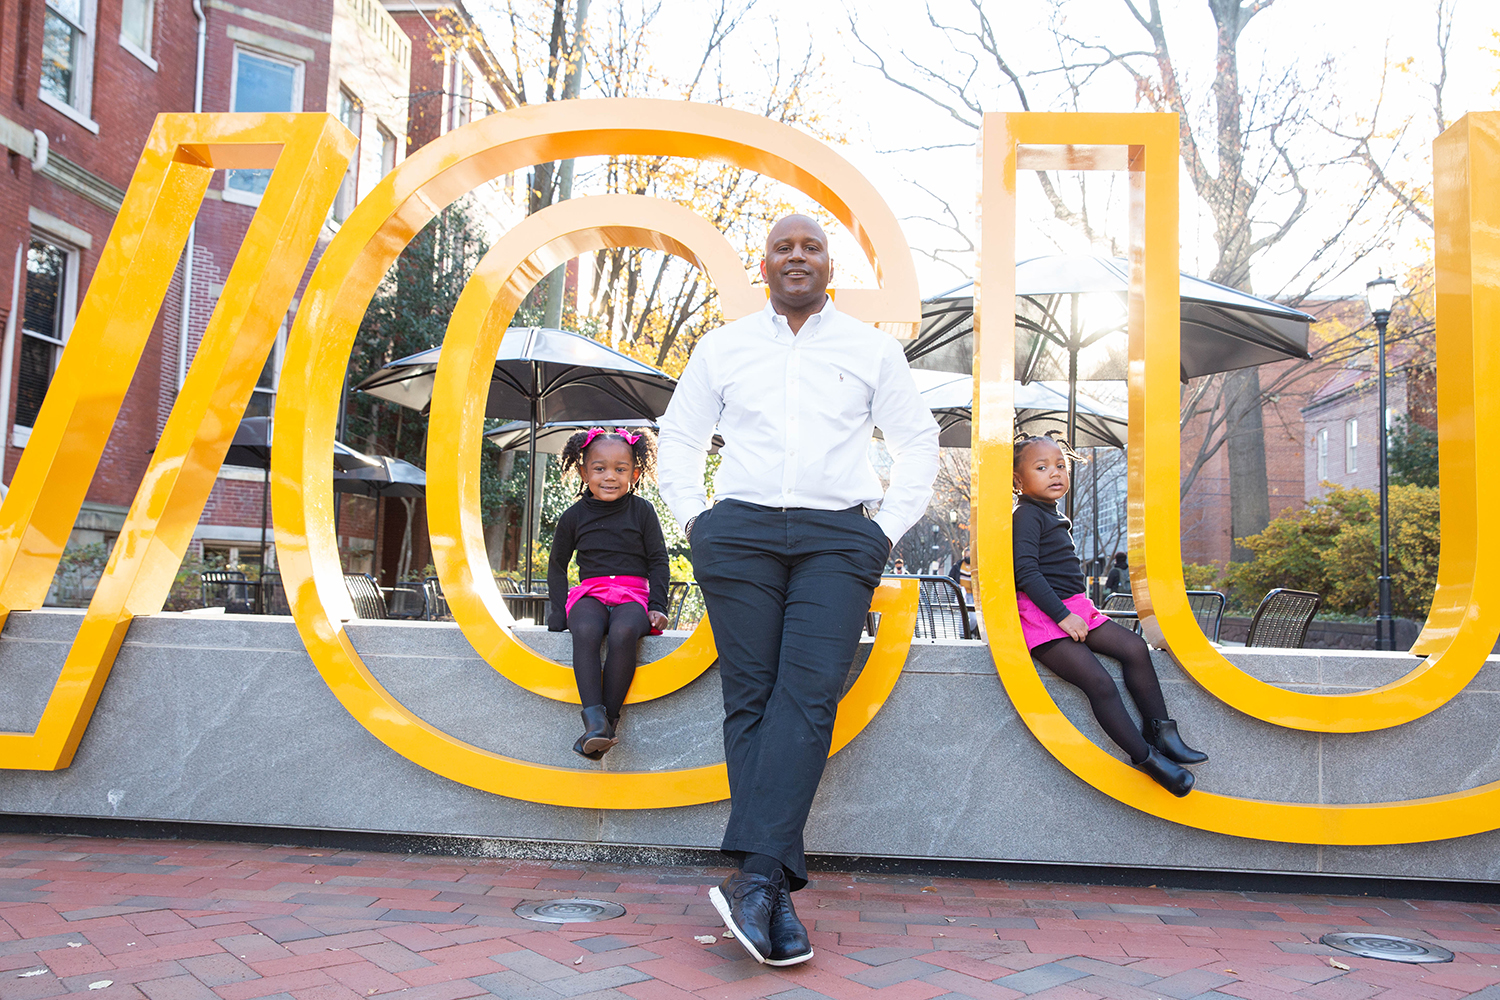 Proud of his alma mater, LeQuan Hylton shares his VCU spirit with daughters Carter (left) and Emory (right).